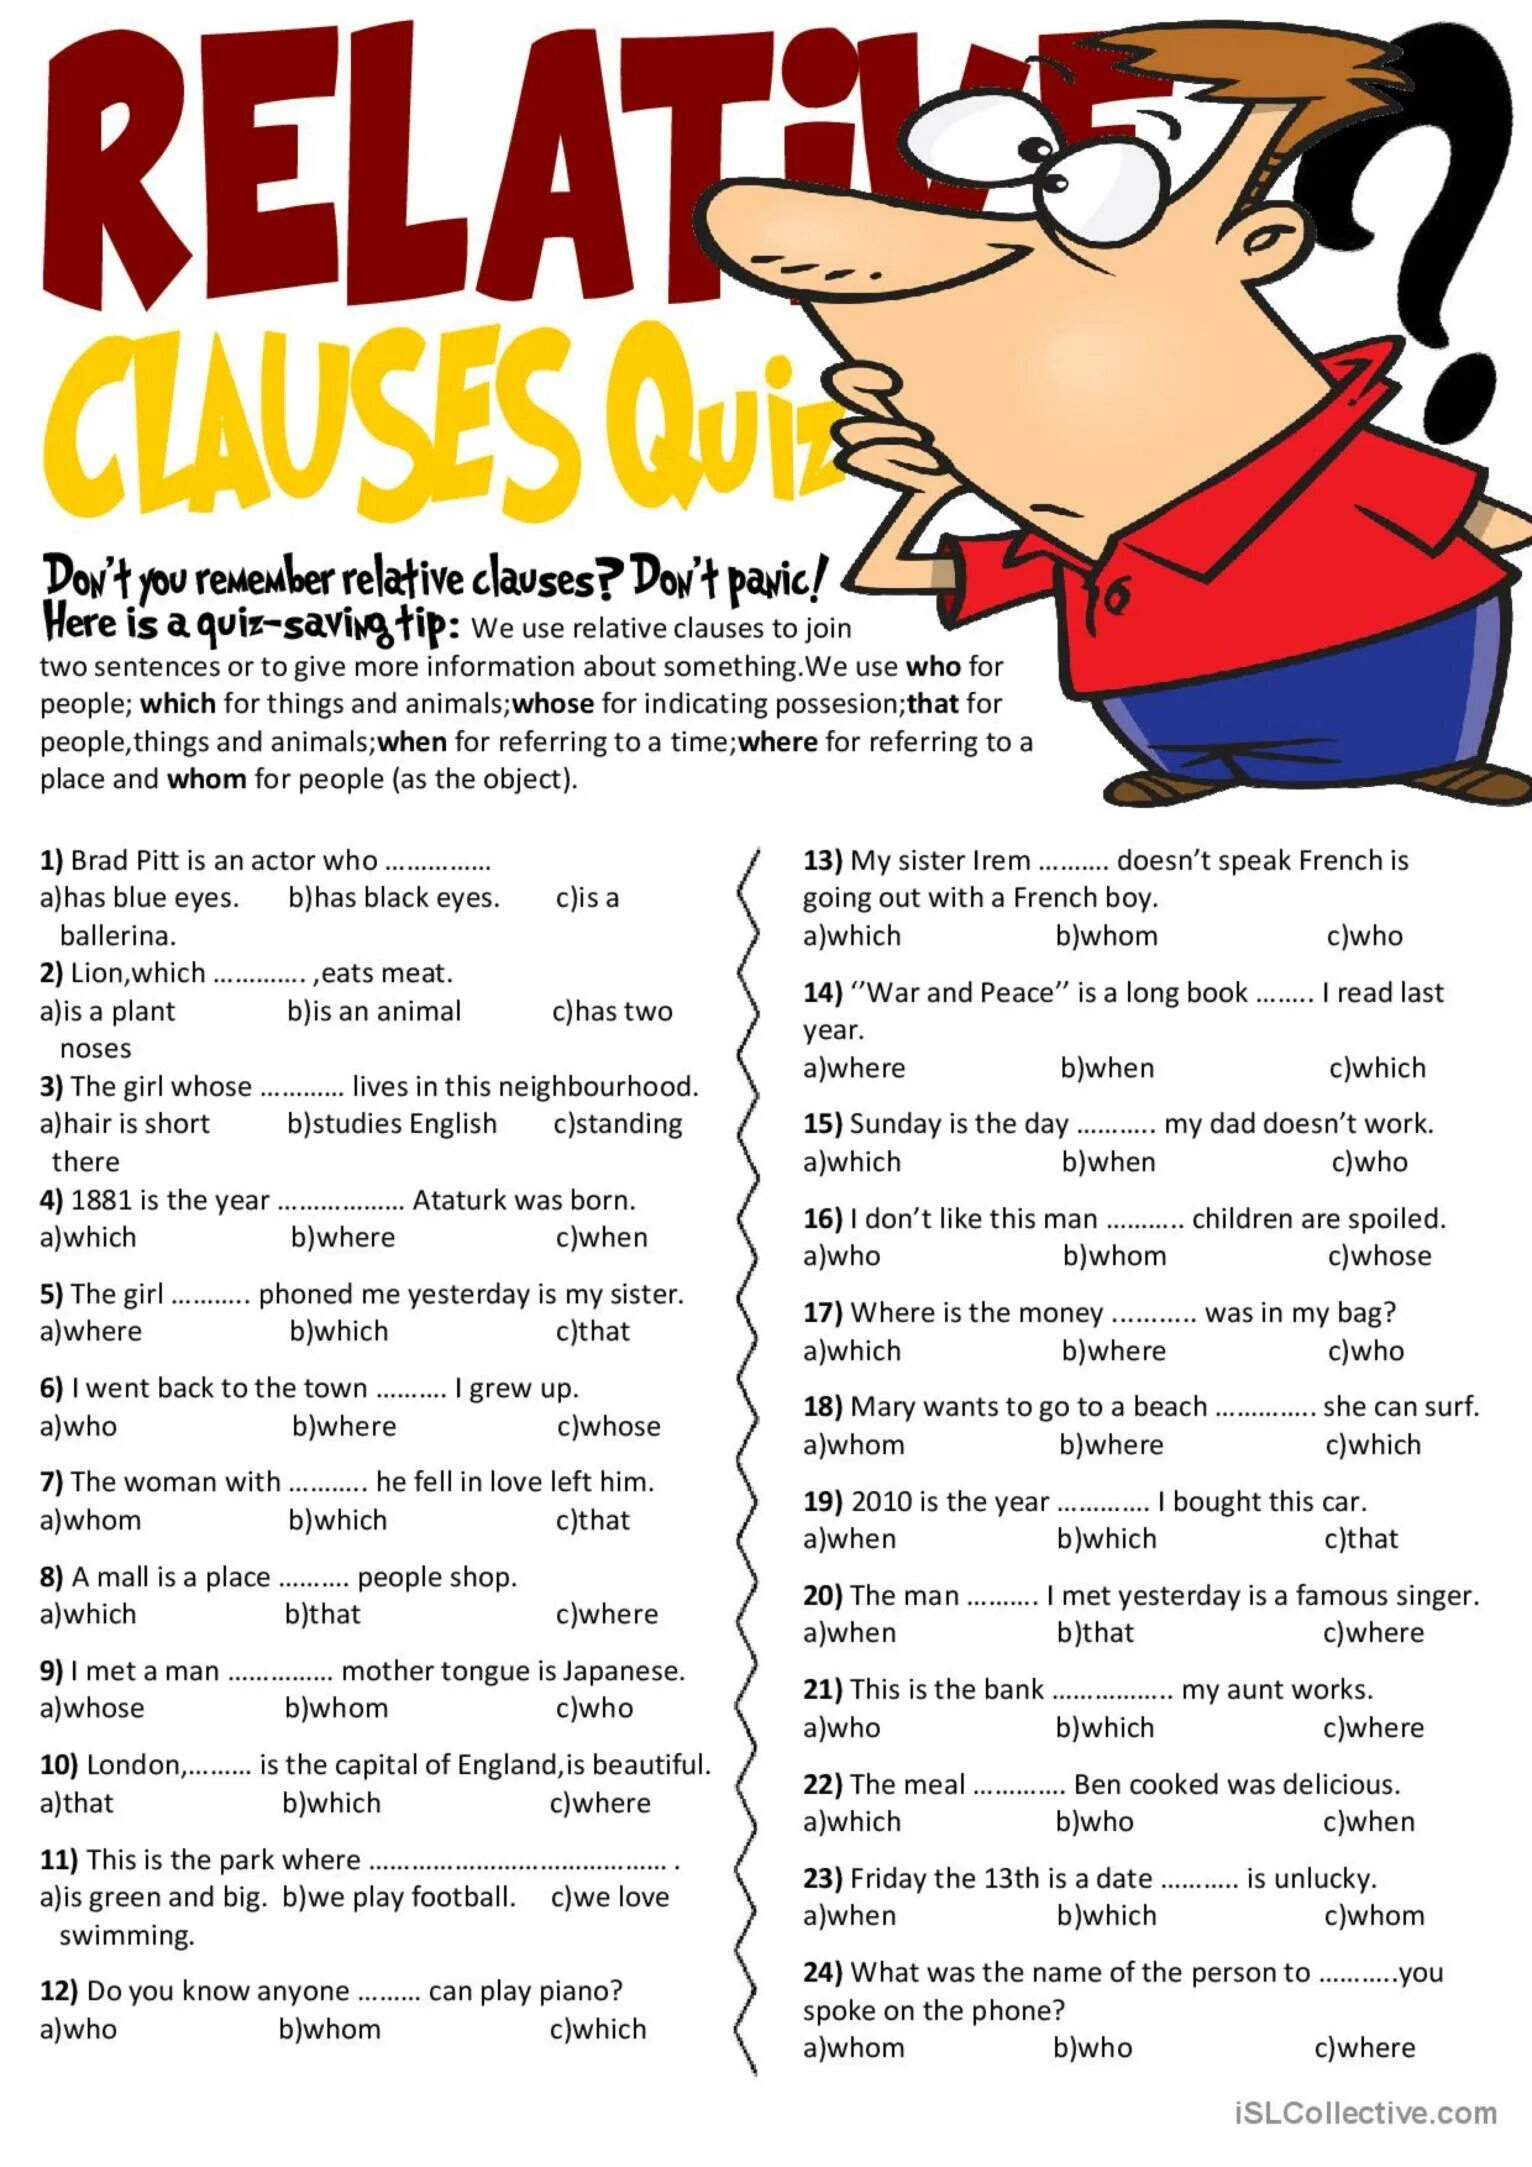 Who is who vocabulary. Relative Clauses в английском языке Worksheets. Грамматика relative Clauses. Relative Clauses в английском языке exercises. Relative Clauses в английском упражнения.